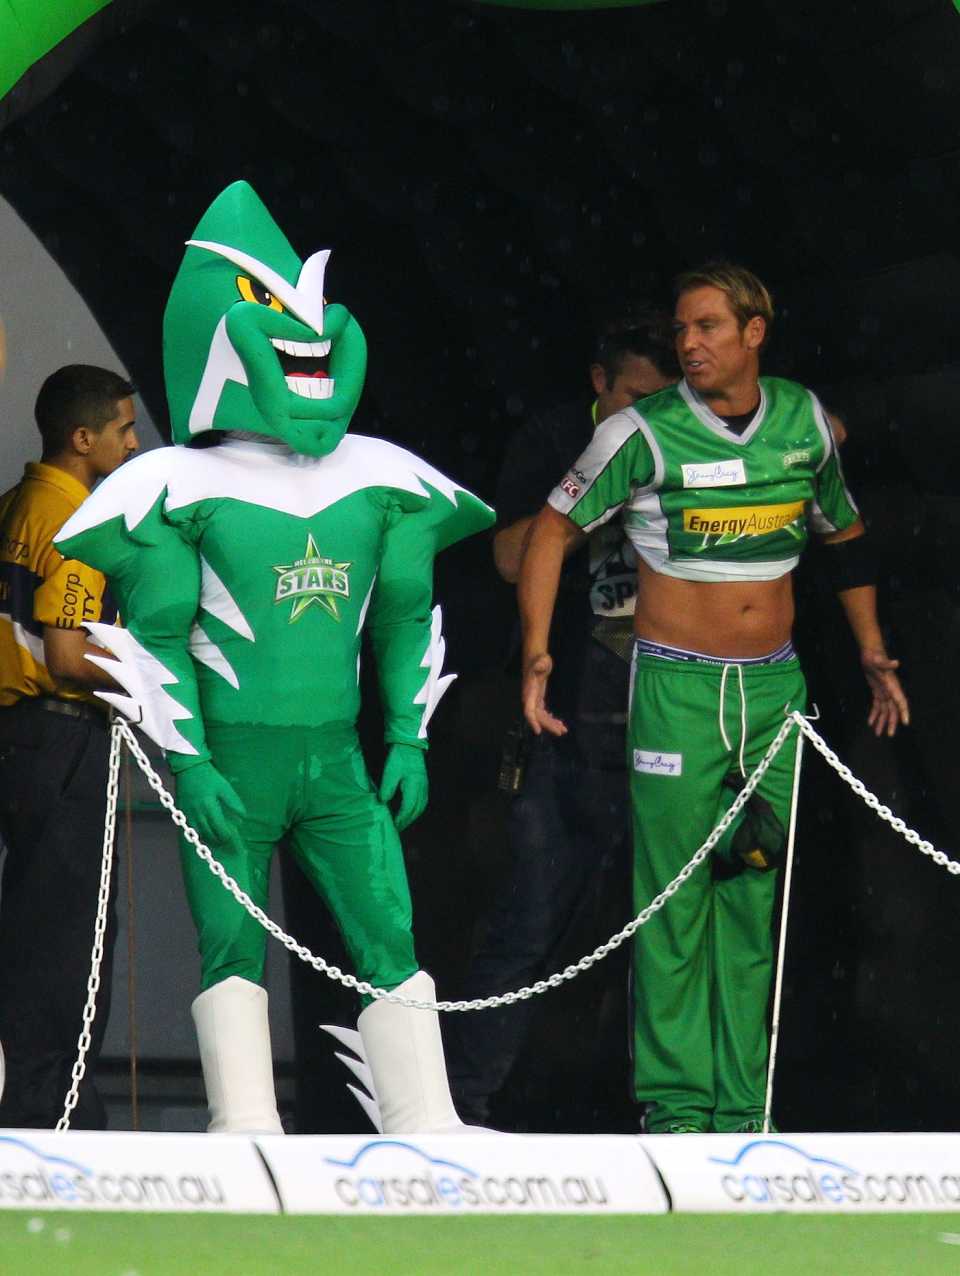 Shane Warne is miked up for television next to the Stars mascot, Melbourne Stars vs Melbourne Renegades, Big Bash League 2012, Melbourne Cricket Ground, January 7, 2012